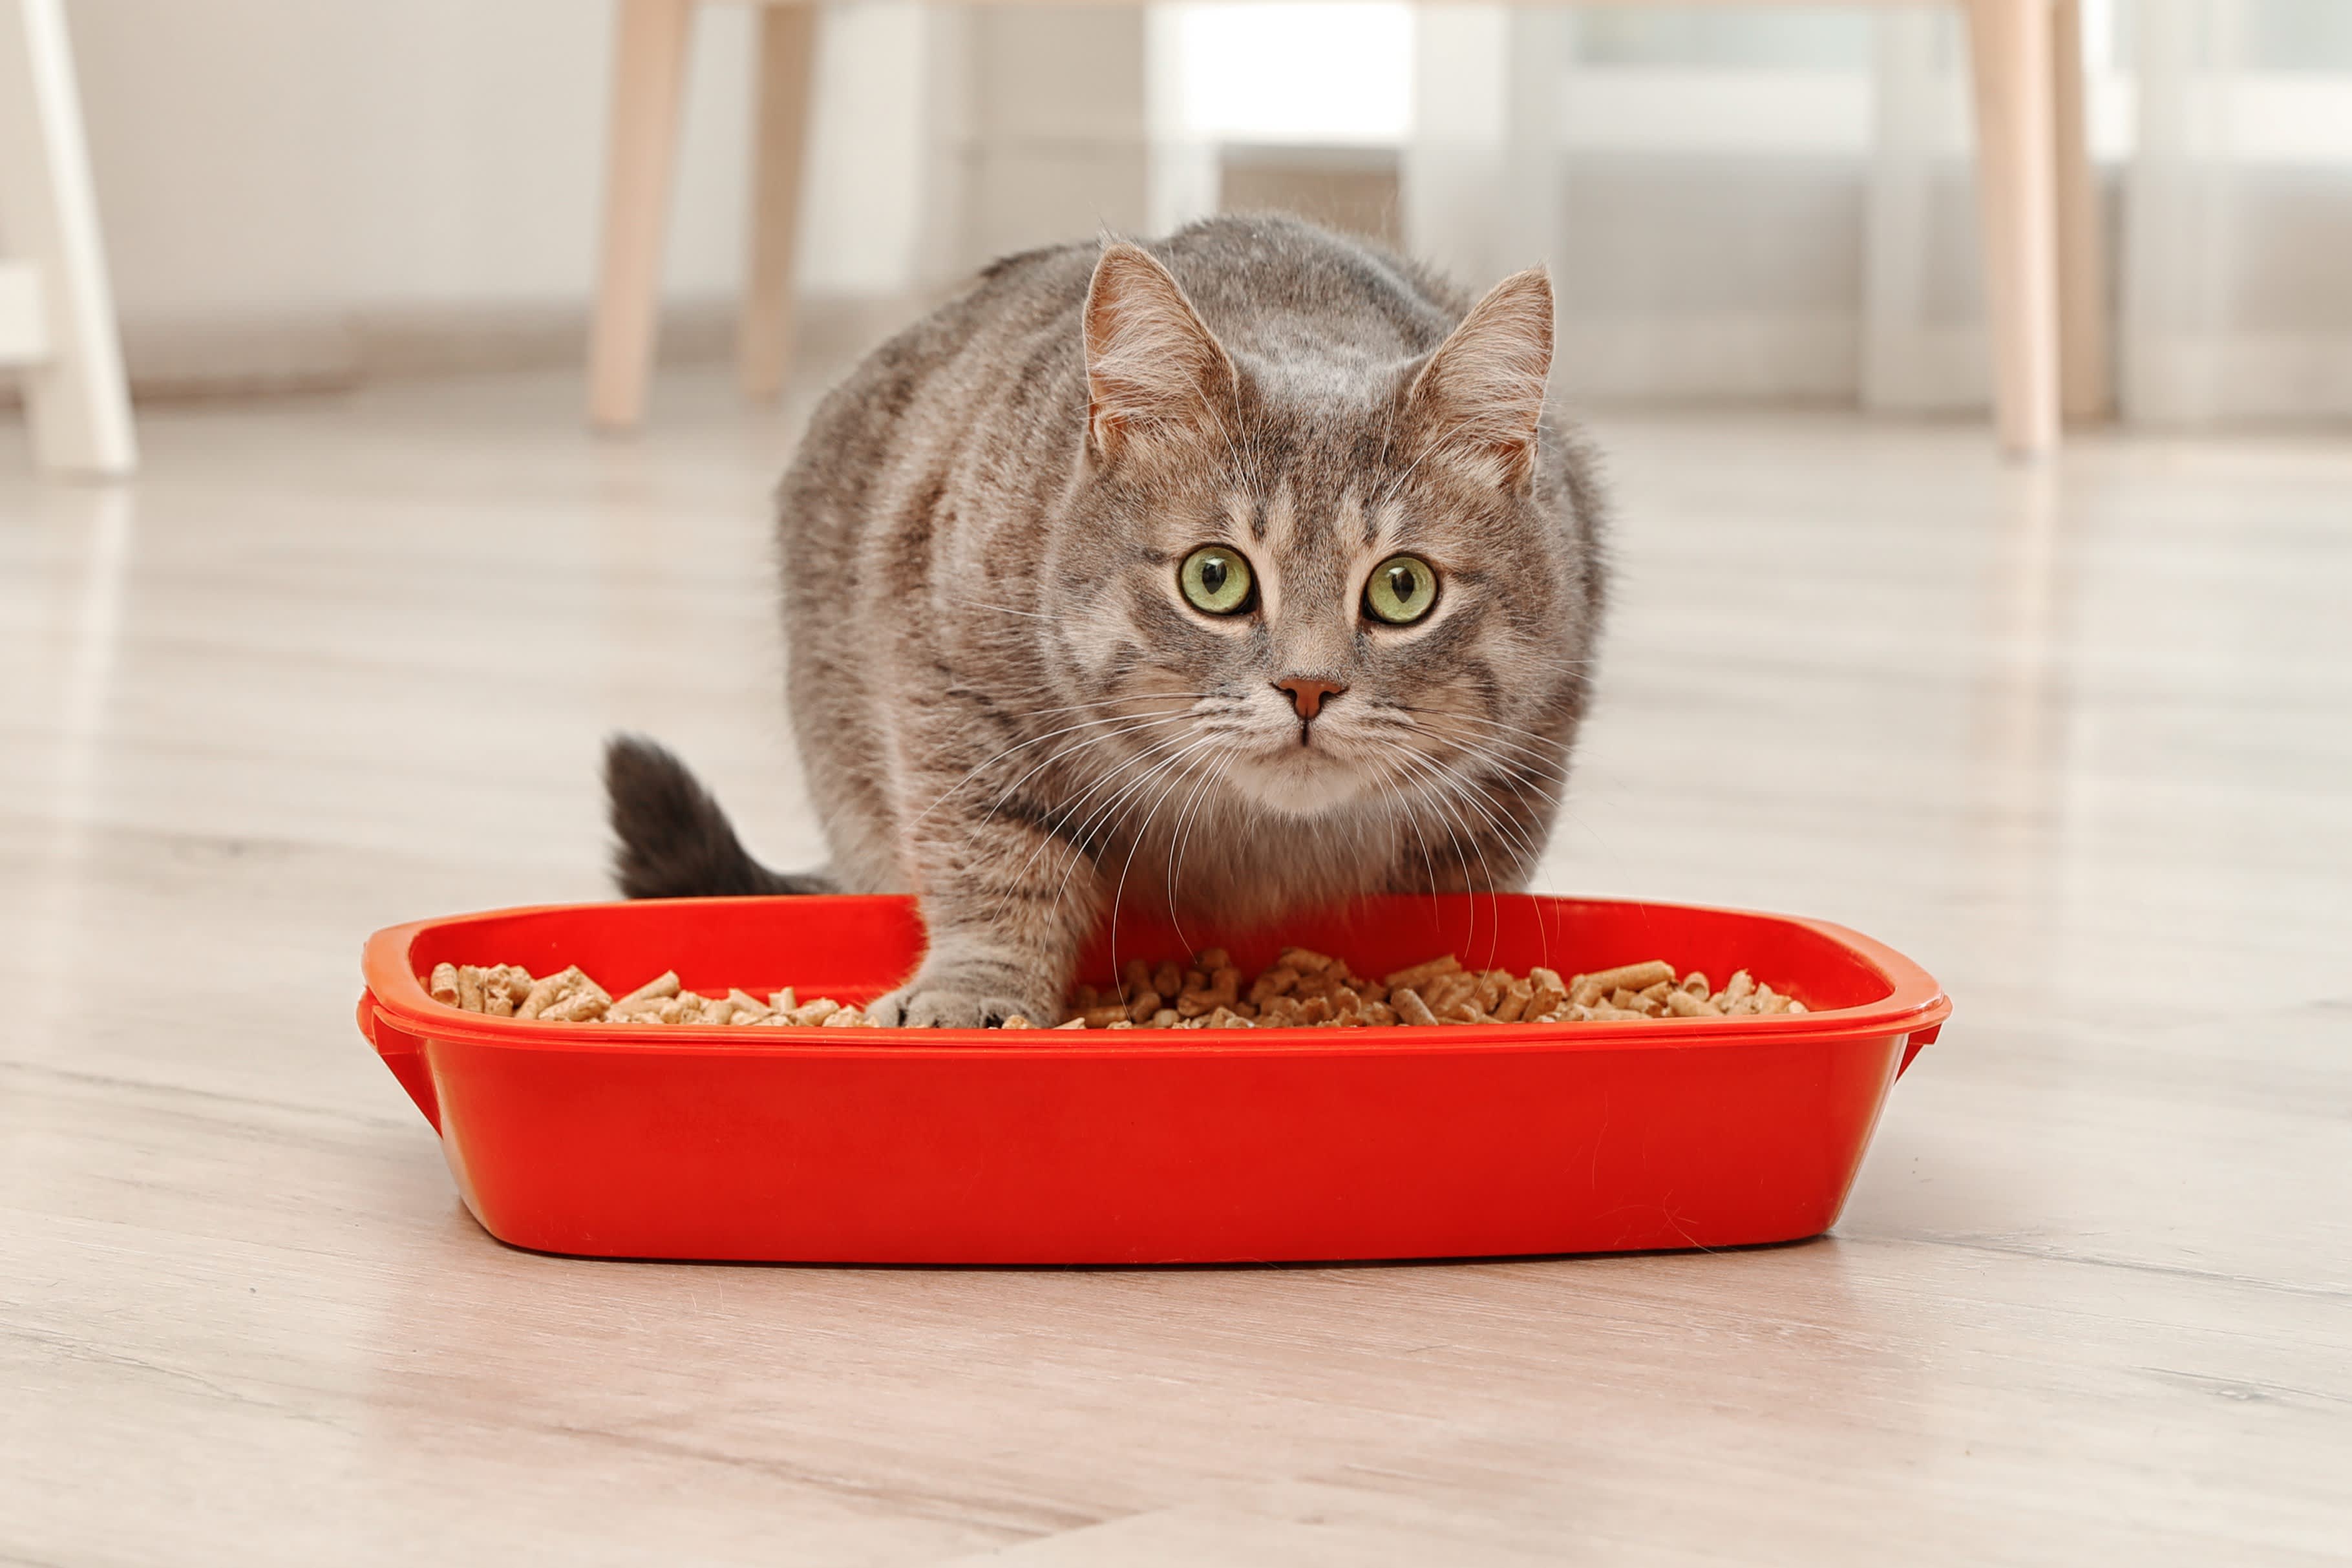 How to maintain your kitten's litter box